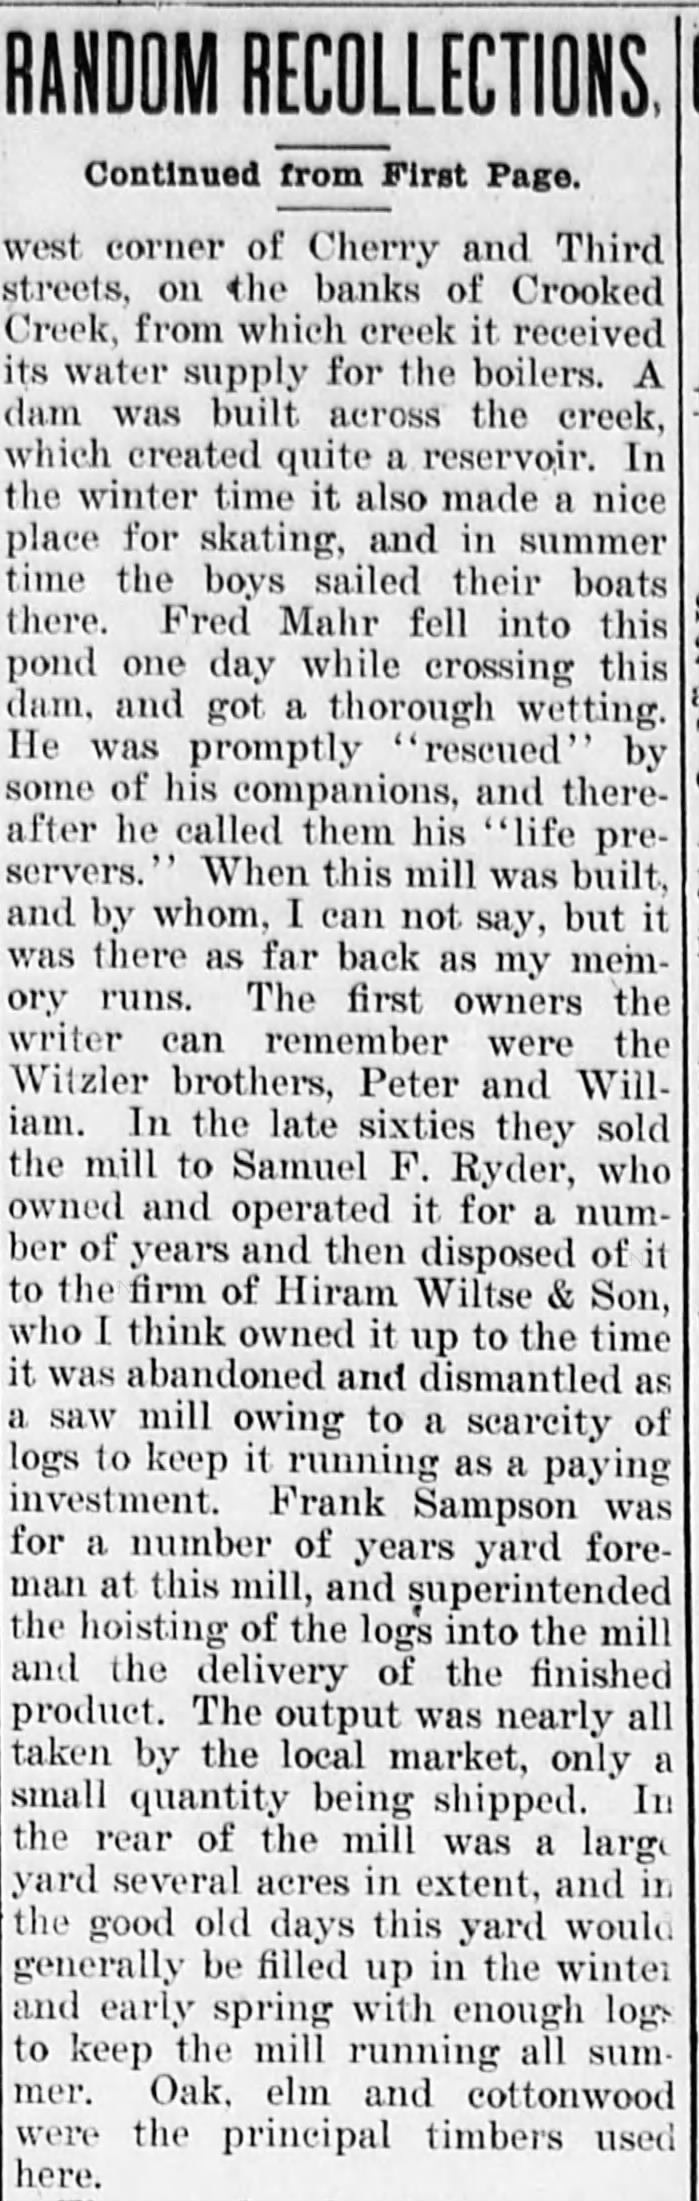 Rememberance of Perrysburg Saw Mill owned by Hiram Wiltse